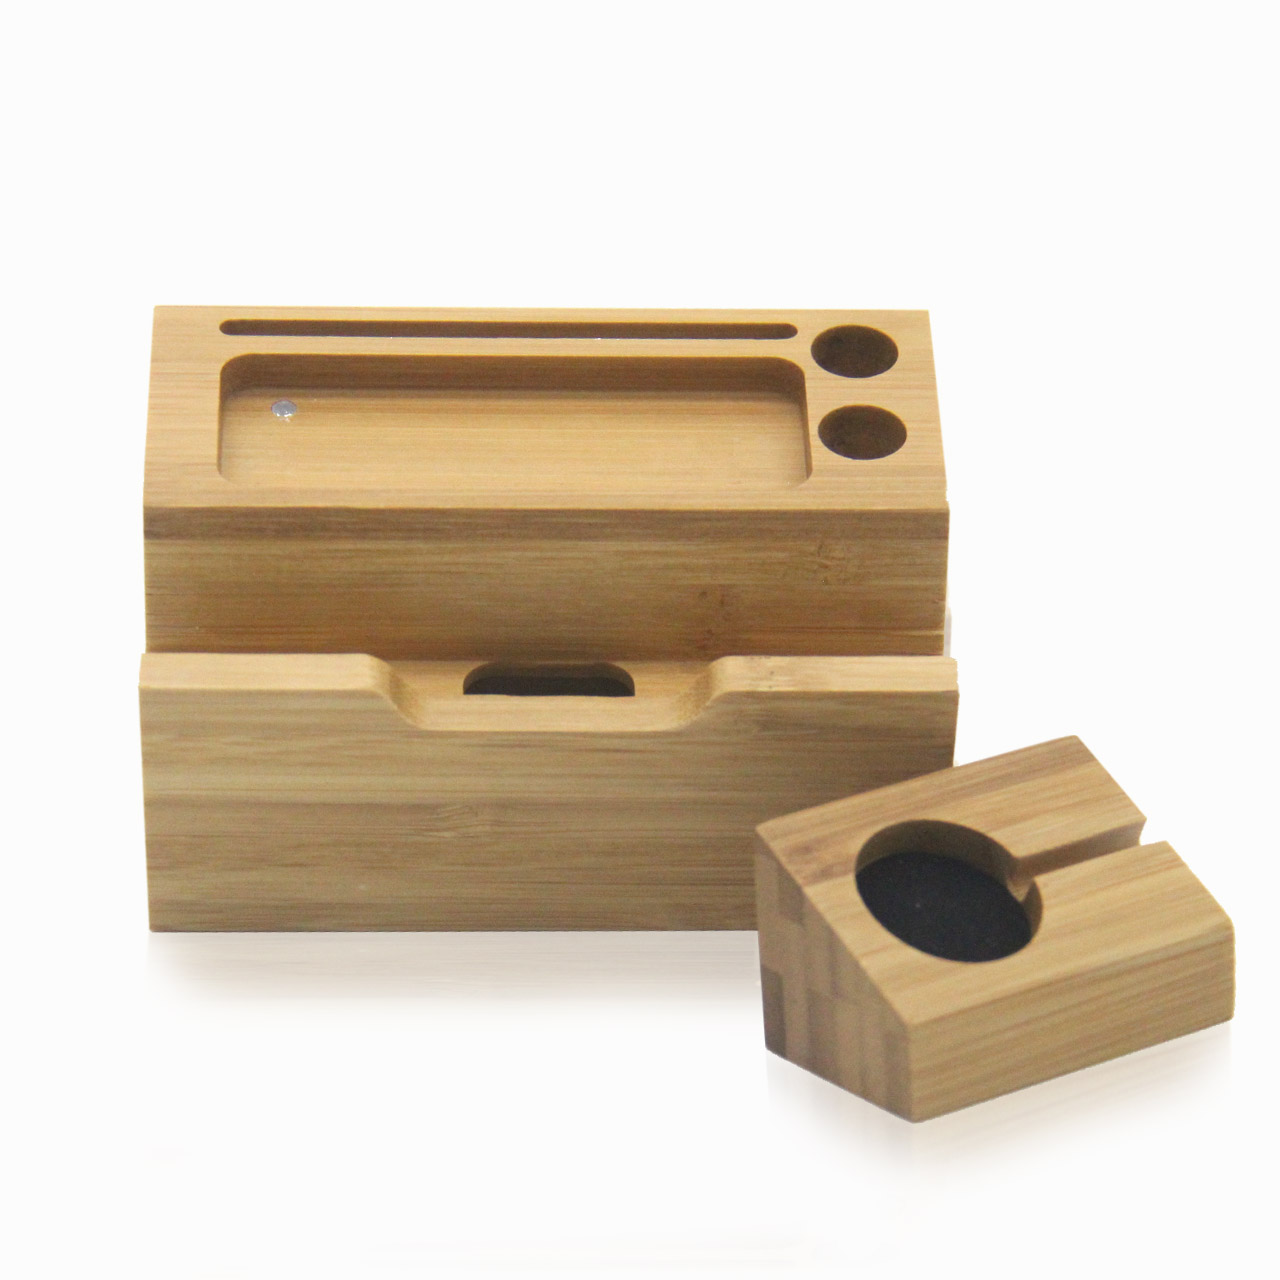 Natural-Bamboo-USB-Charging-Dock-Stand-Holder-Bracket-for-Mobile-Phone-Smart-Watch-1282457-5